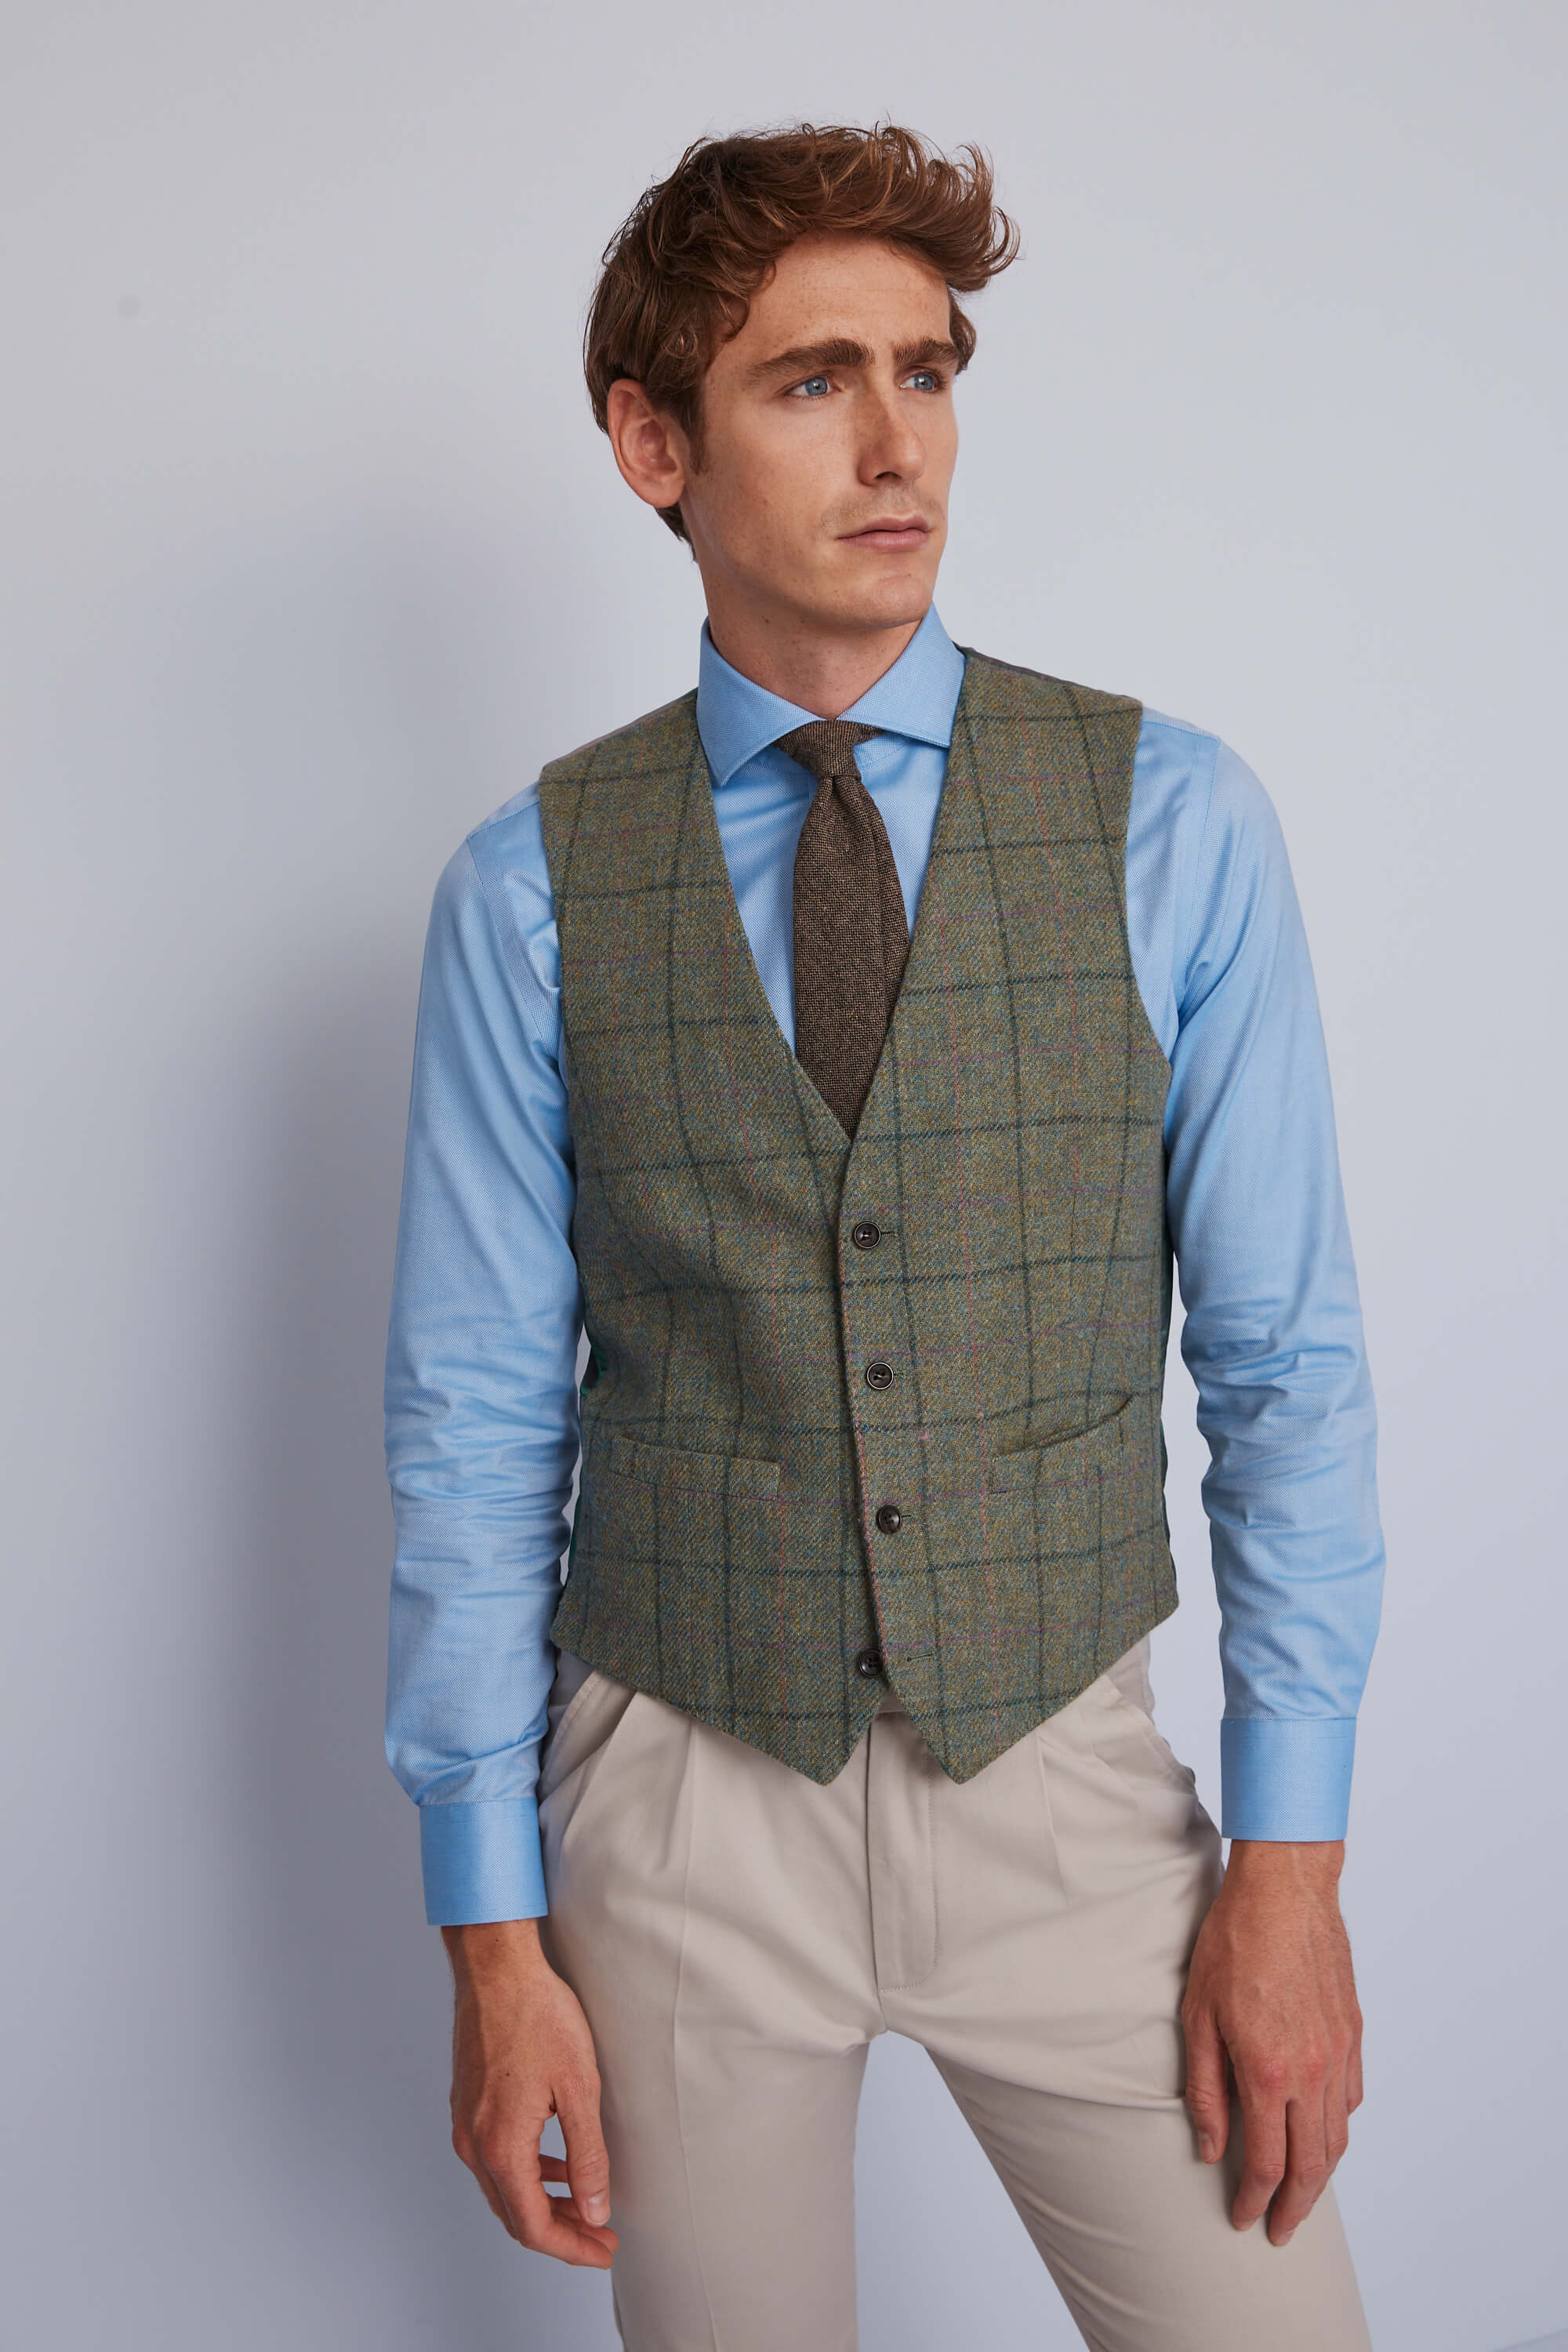 Moss 1851 Green Multi Check Tweed Jacket | Moss Bros Hire